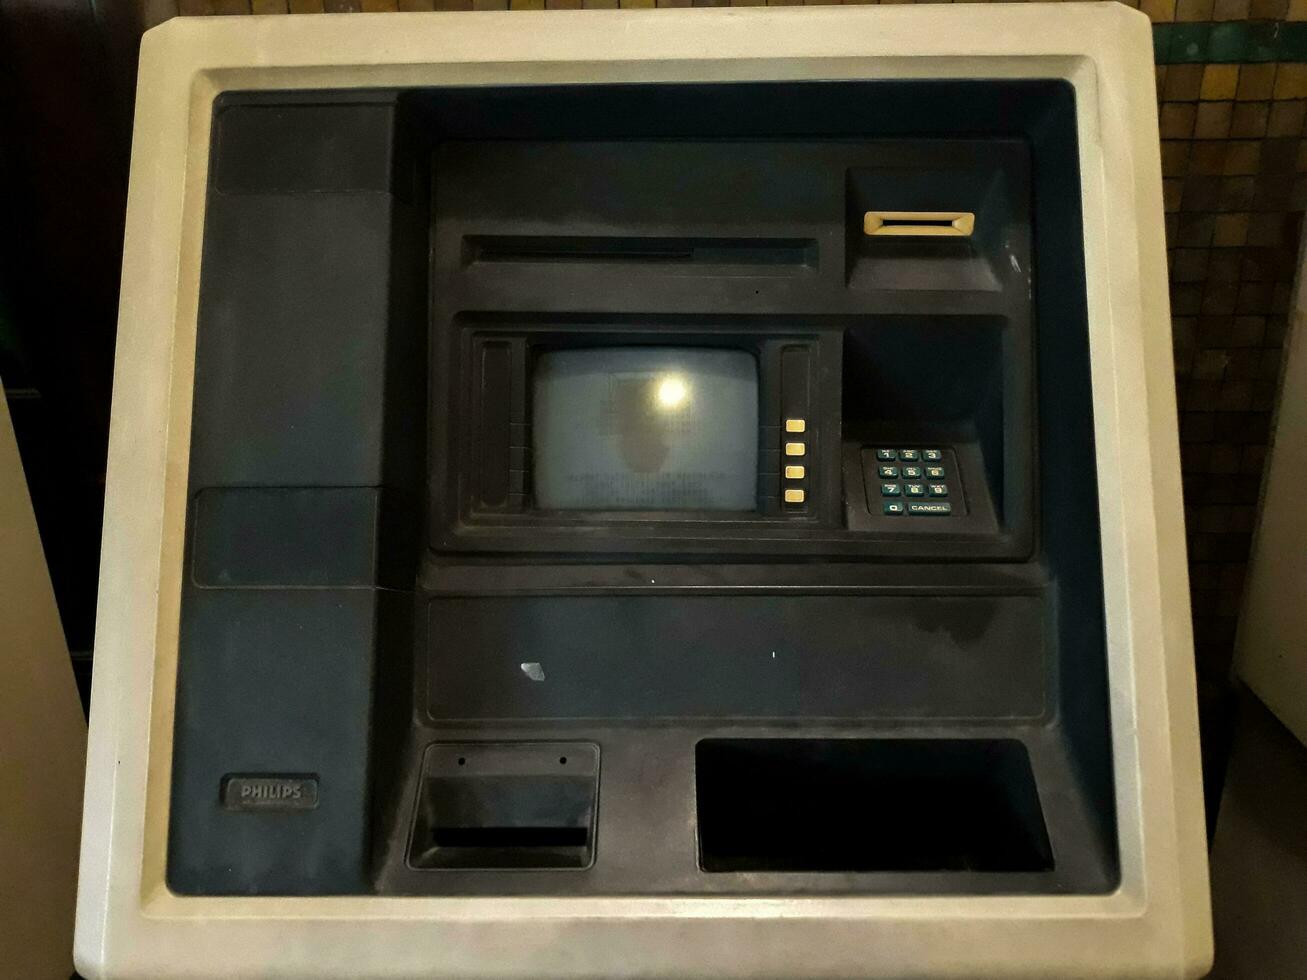 A gray old ATM in the wall. Black frame. Still life in Museum Mandiri. JAKARTA, INDONESIA, APRIl 8, 2019 photo